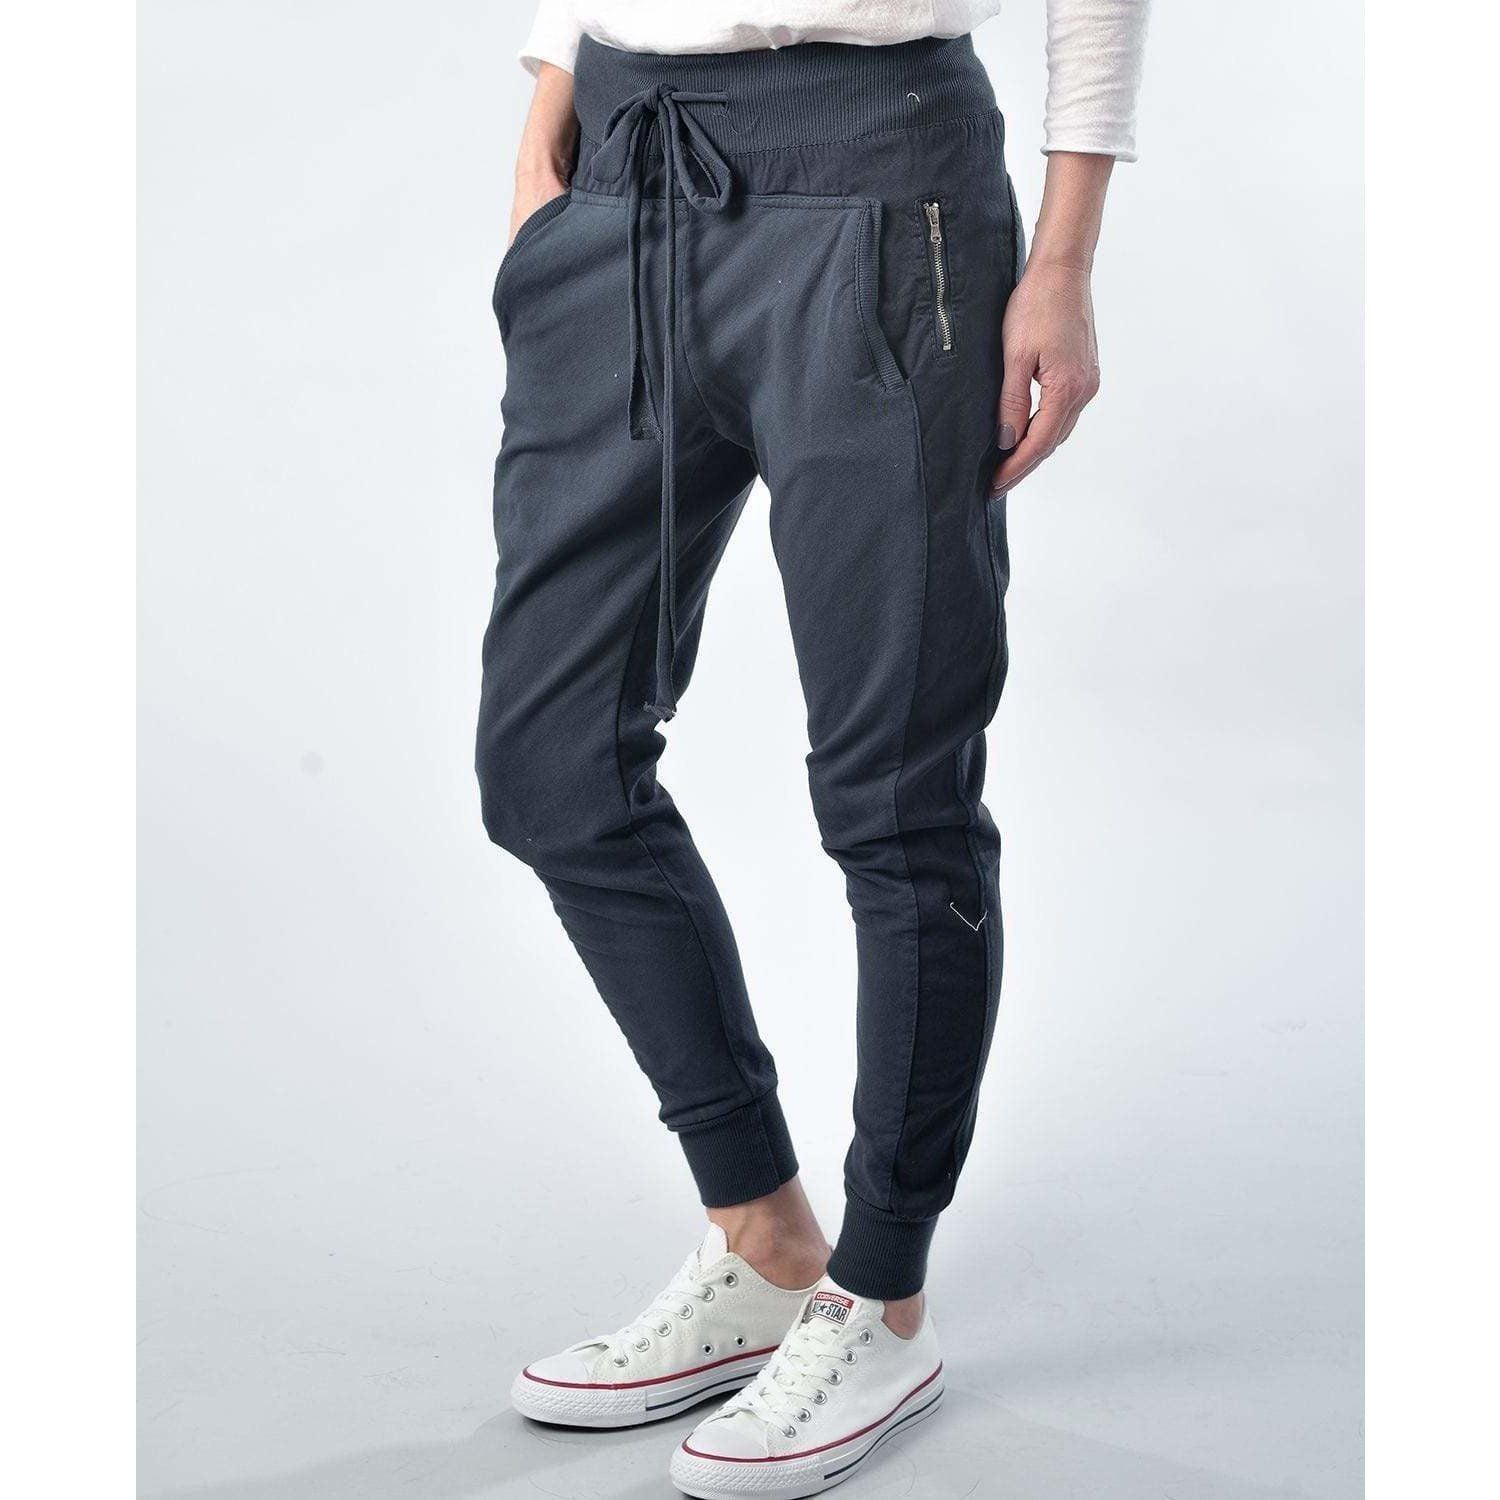 Suzy D  Ultimate Joggers Vegan Leather Black - Tryst Boutique